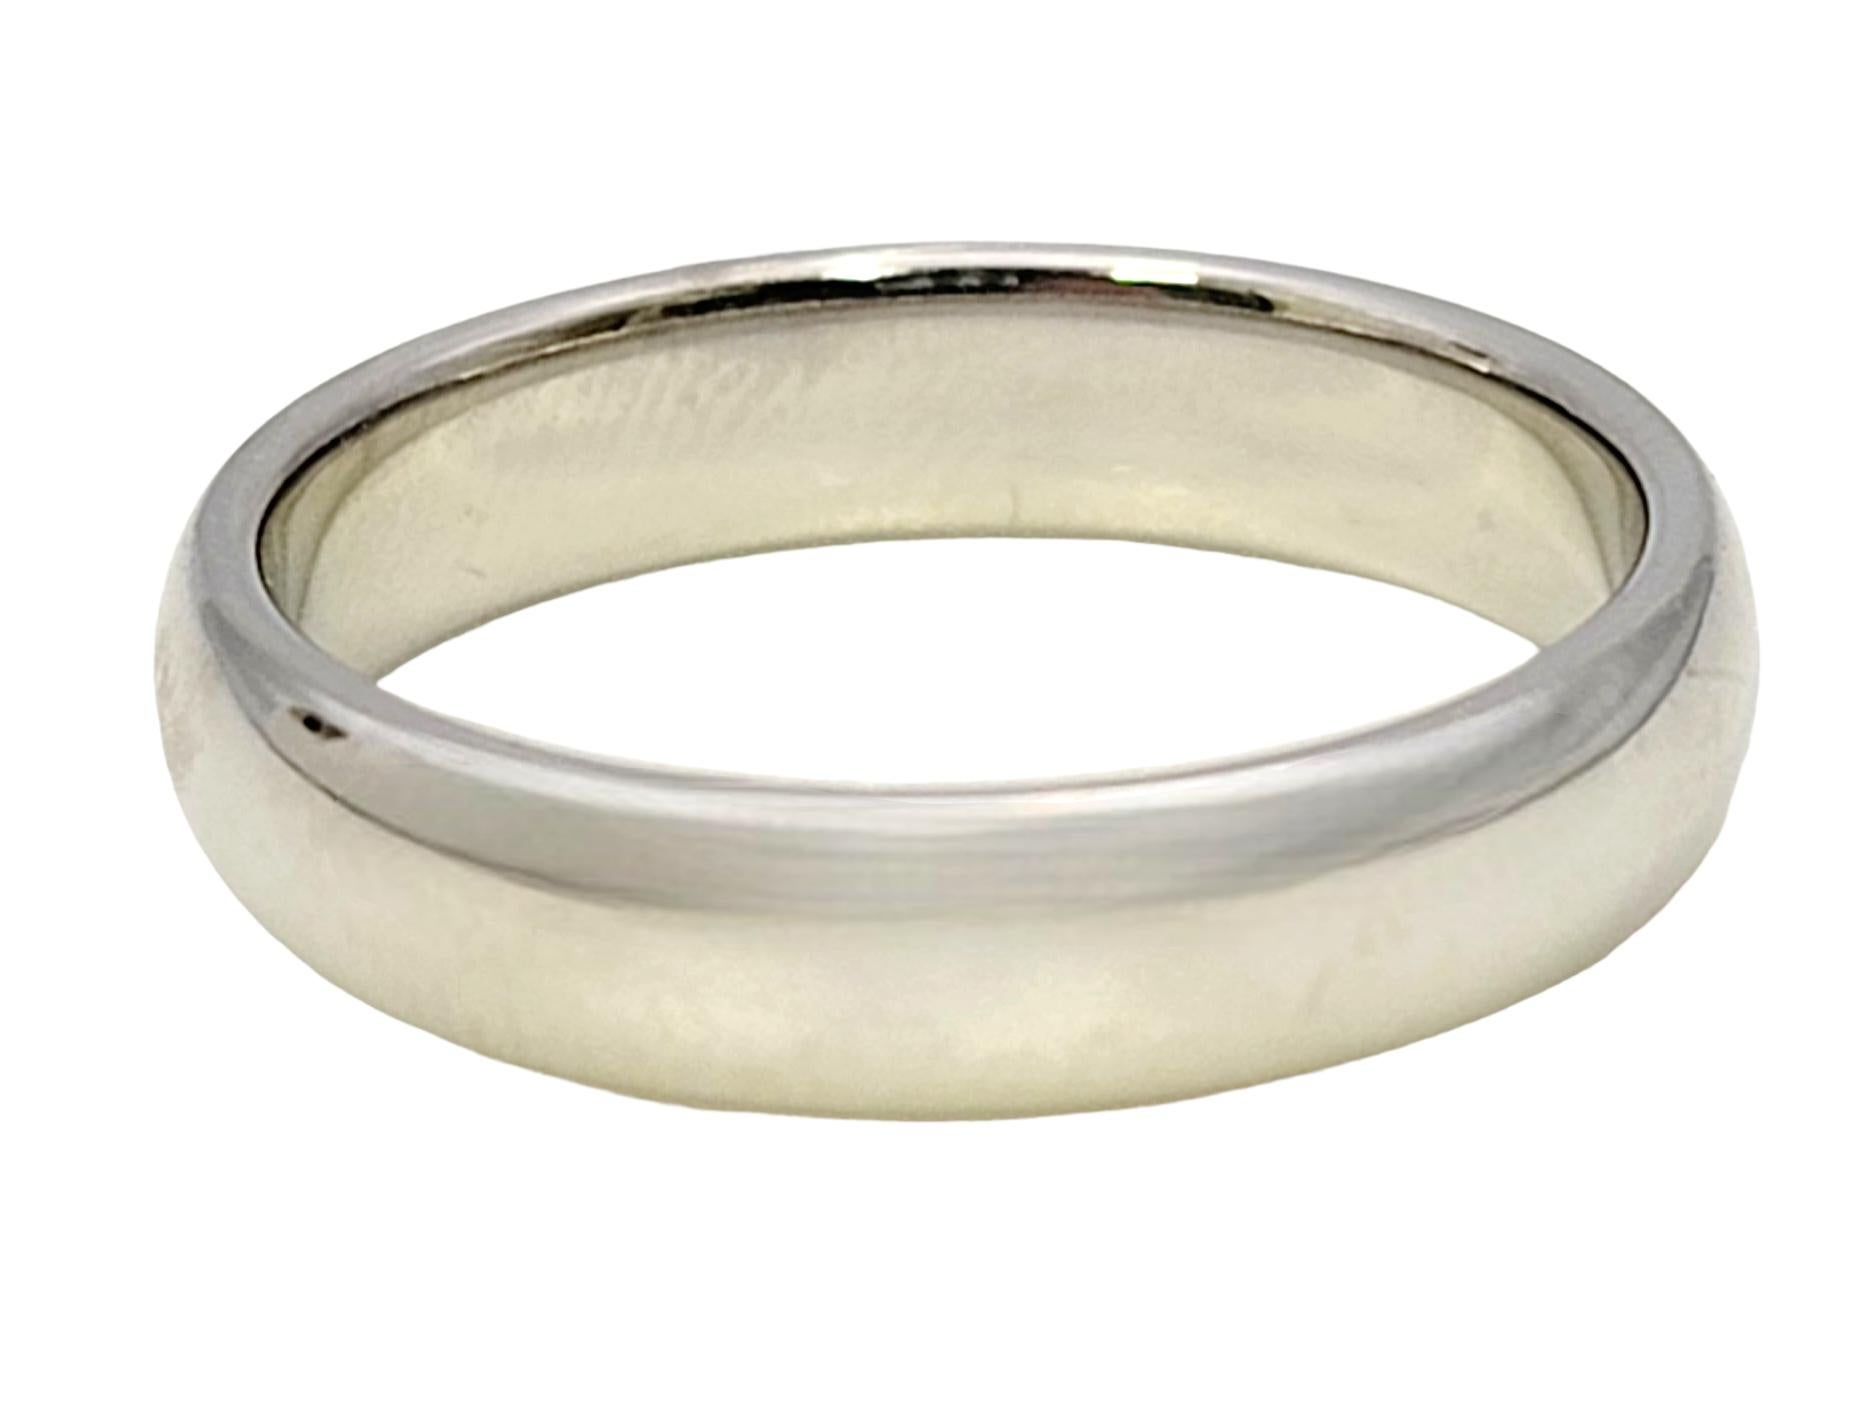 Tiffany & Co. Tiffany 'Forever' Polished Platinum Unisex Wedding Band Ring 8.75 In Good Condition For Sale In Scottsdale, AZ